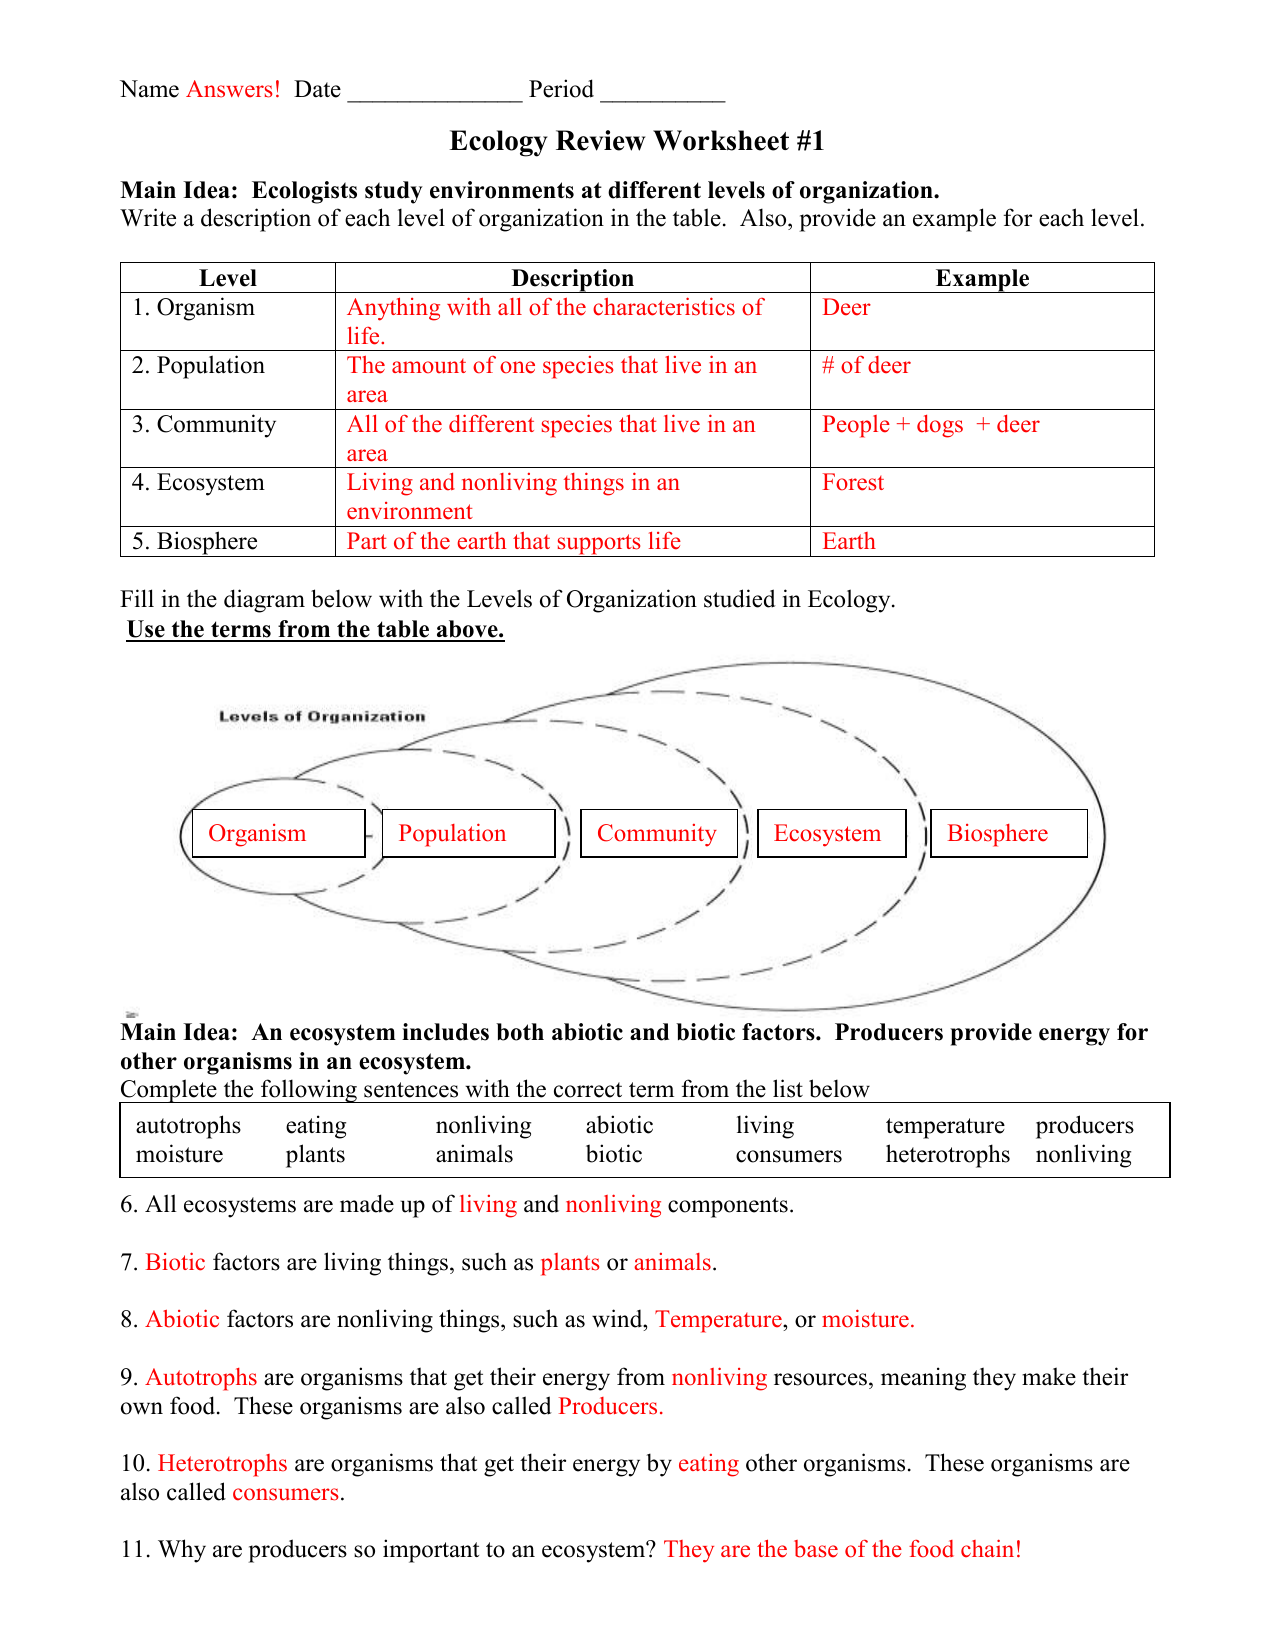 ecology-review-worksheet-11-answers With Levels Of Ecological Organization Worksheet